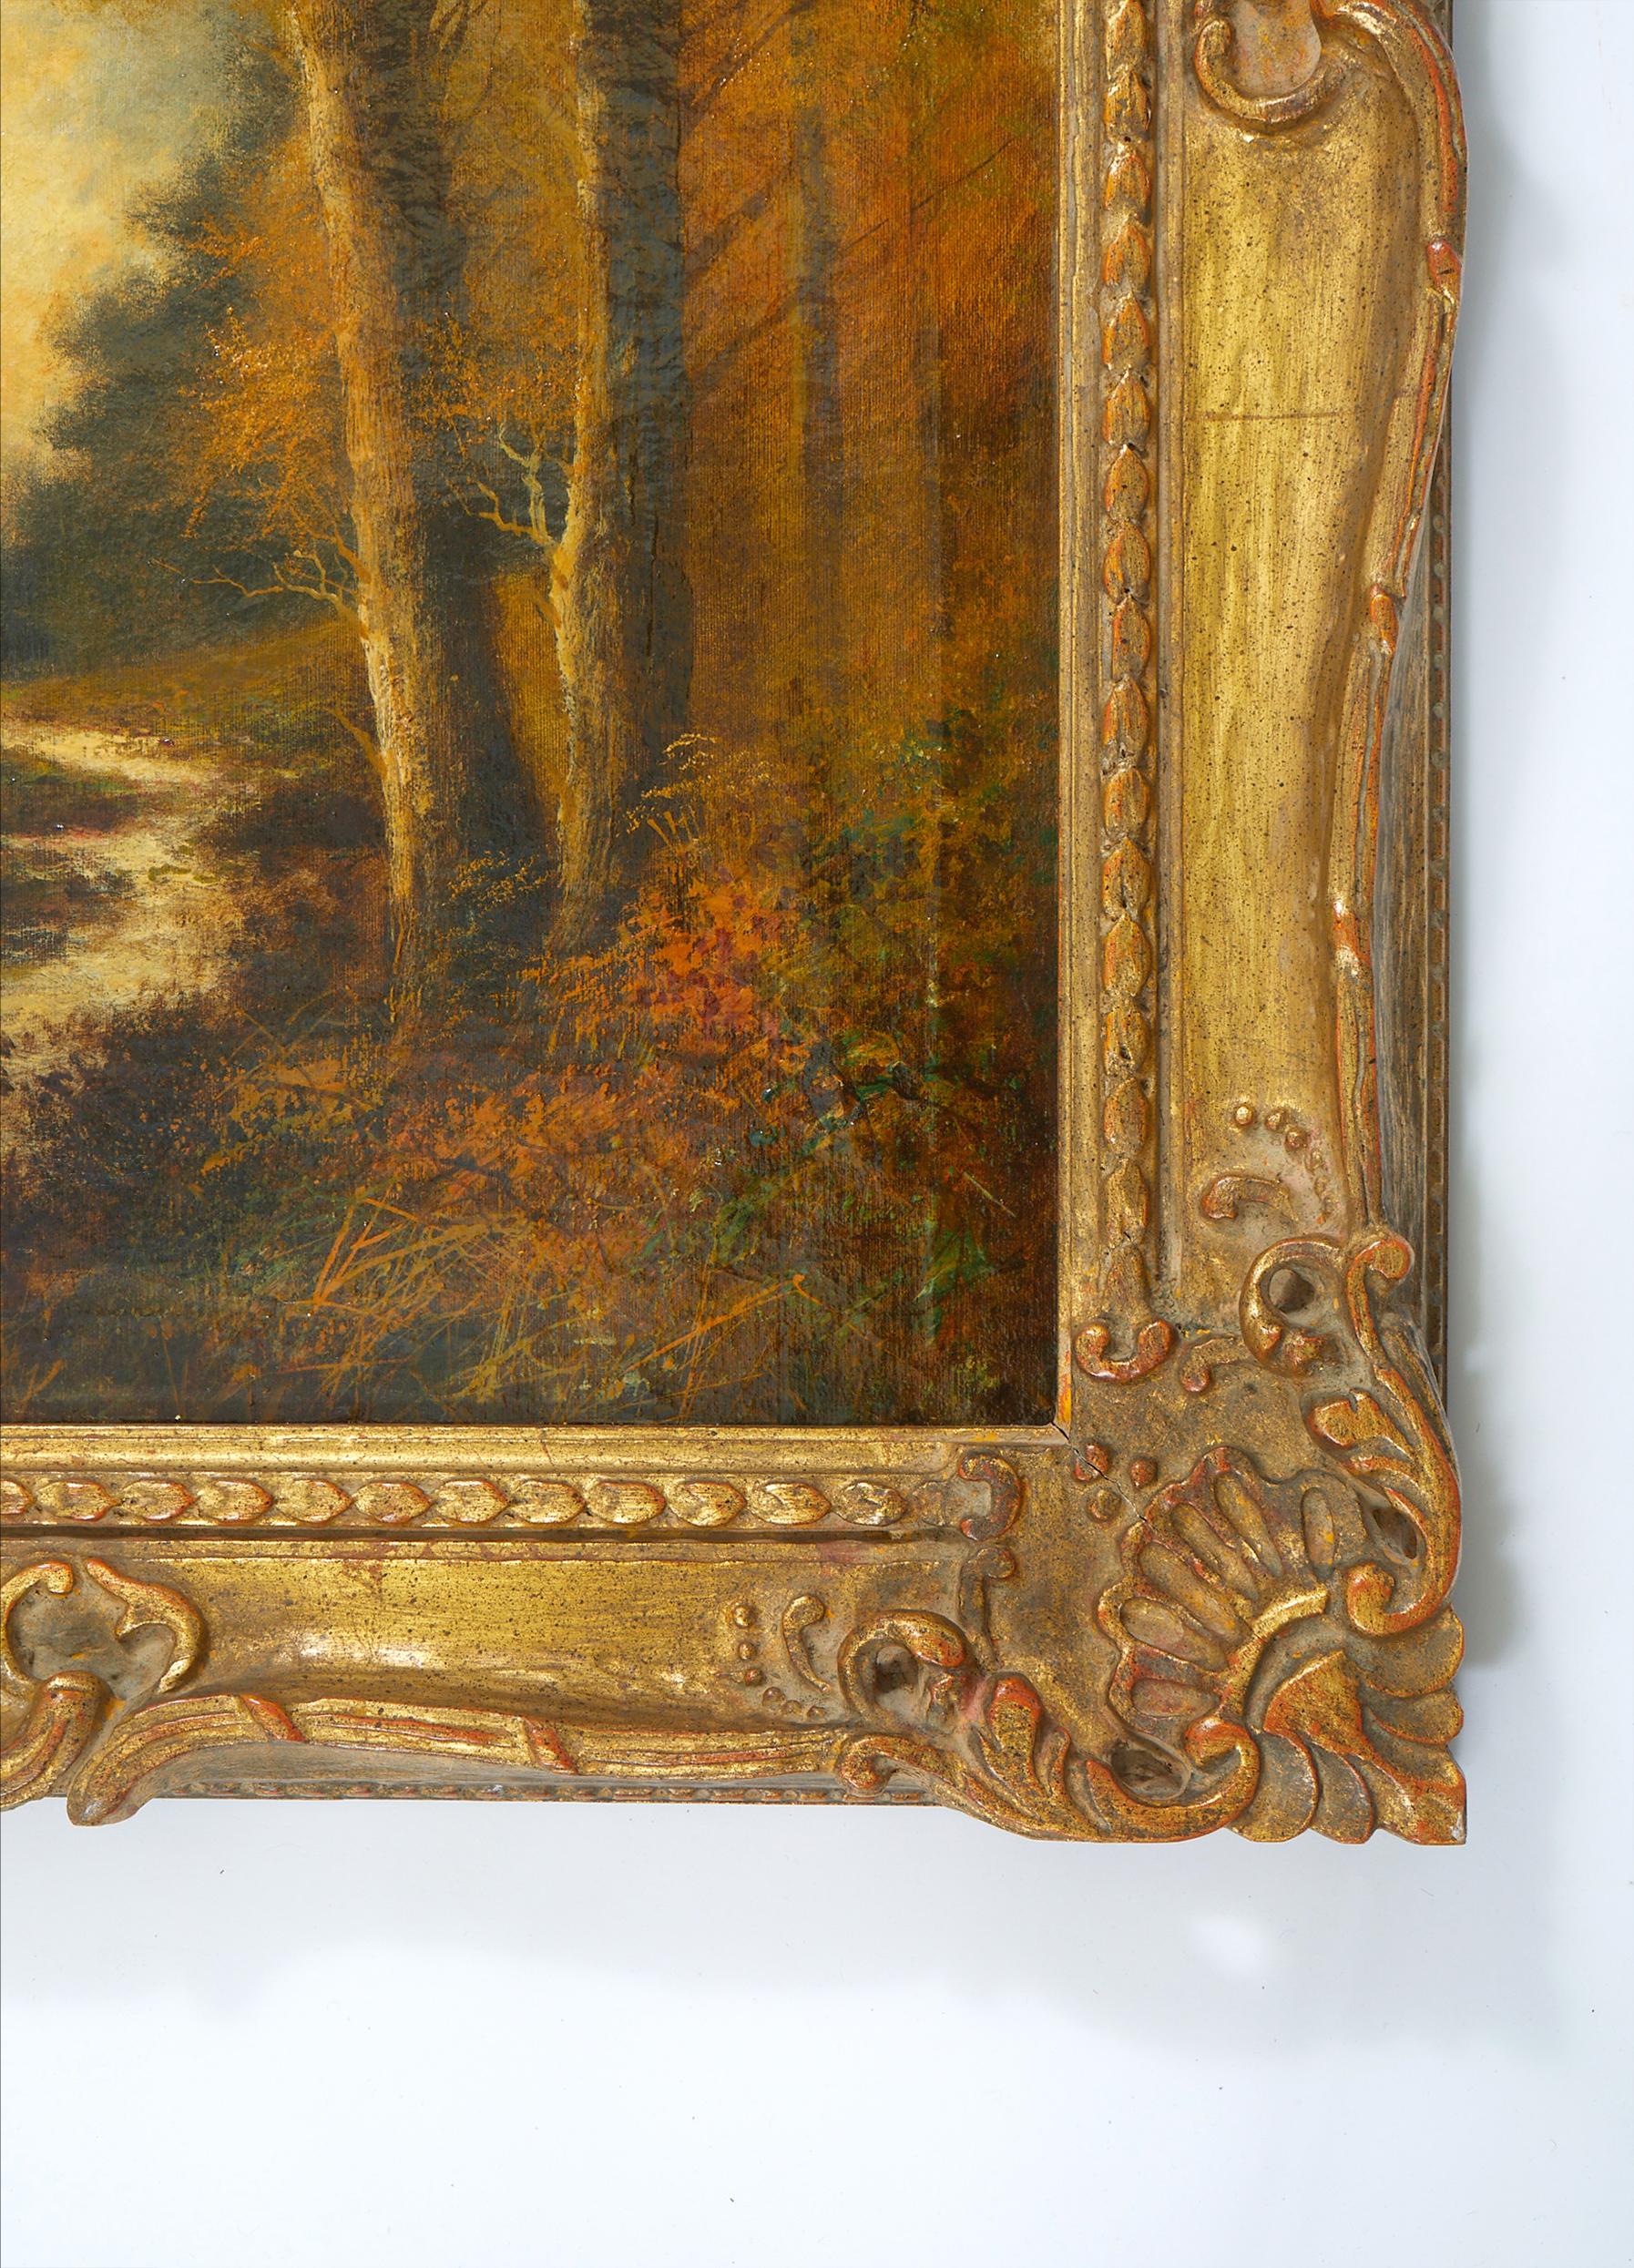 Early 19th century gilt wood framed oil on canvas painting by G Linton featuring wooded scene with stream. The painting is in good antique condition. Minor wear consistent with age / use. Artist signature lower left corner. The oil / canvas painting